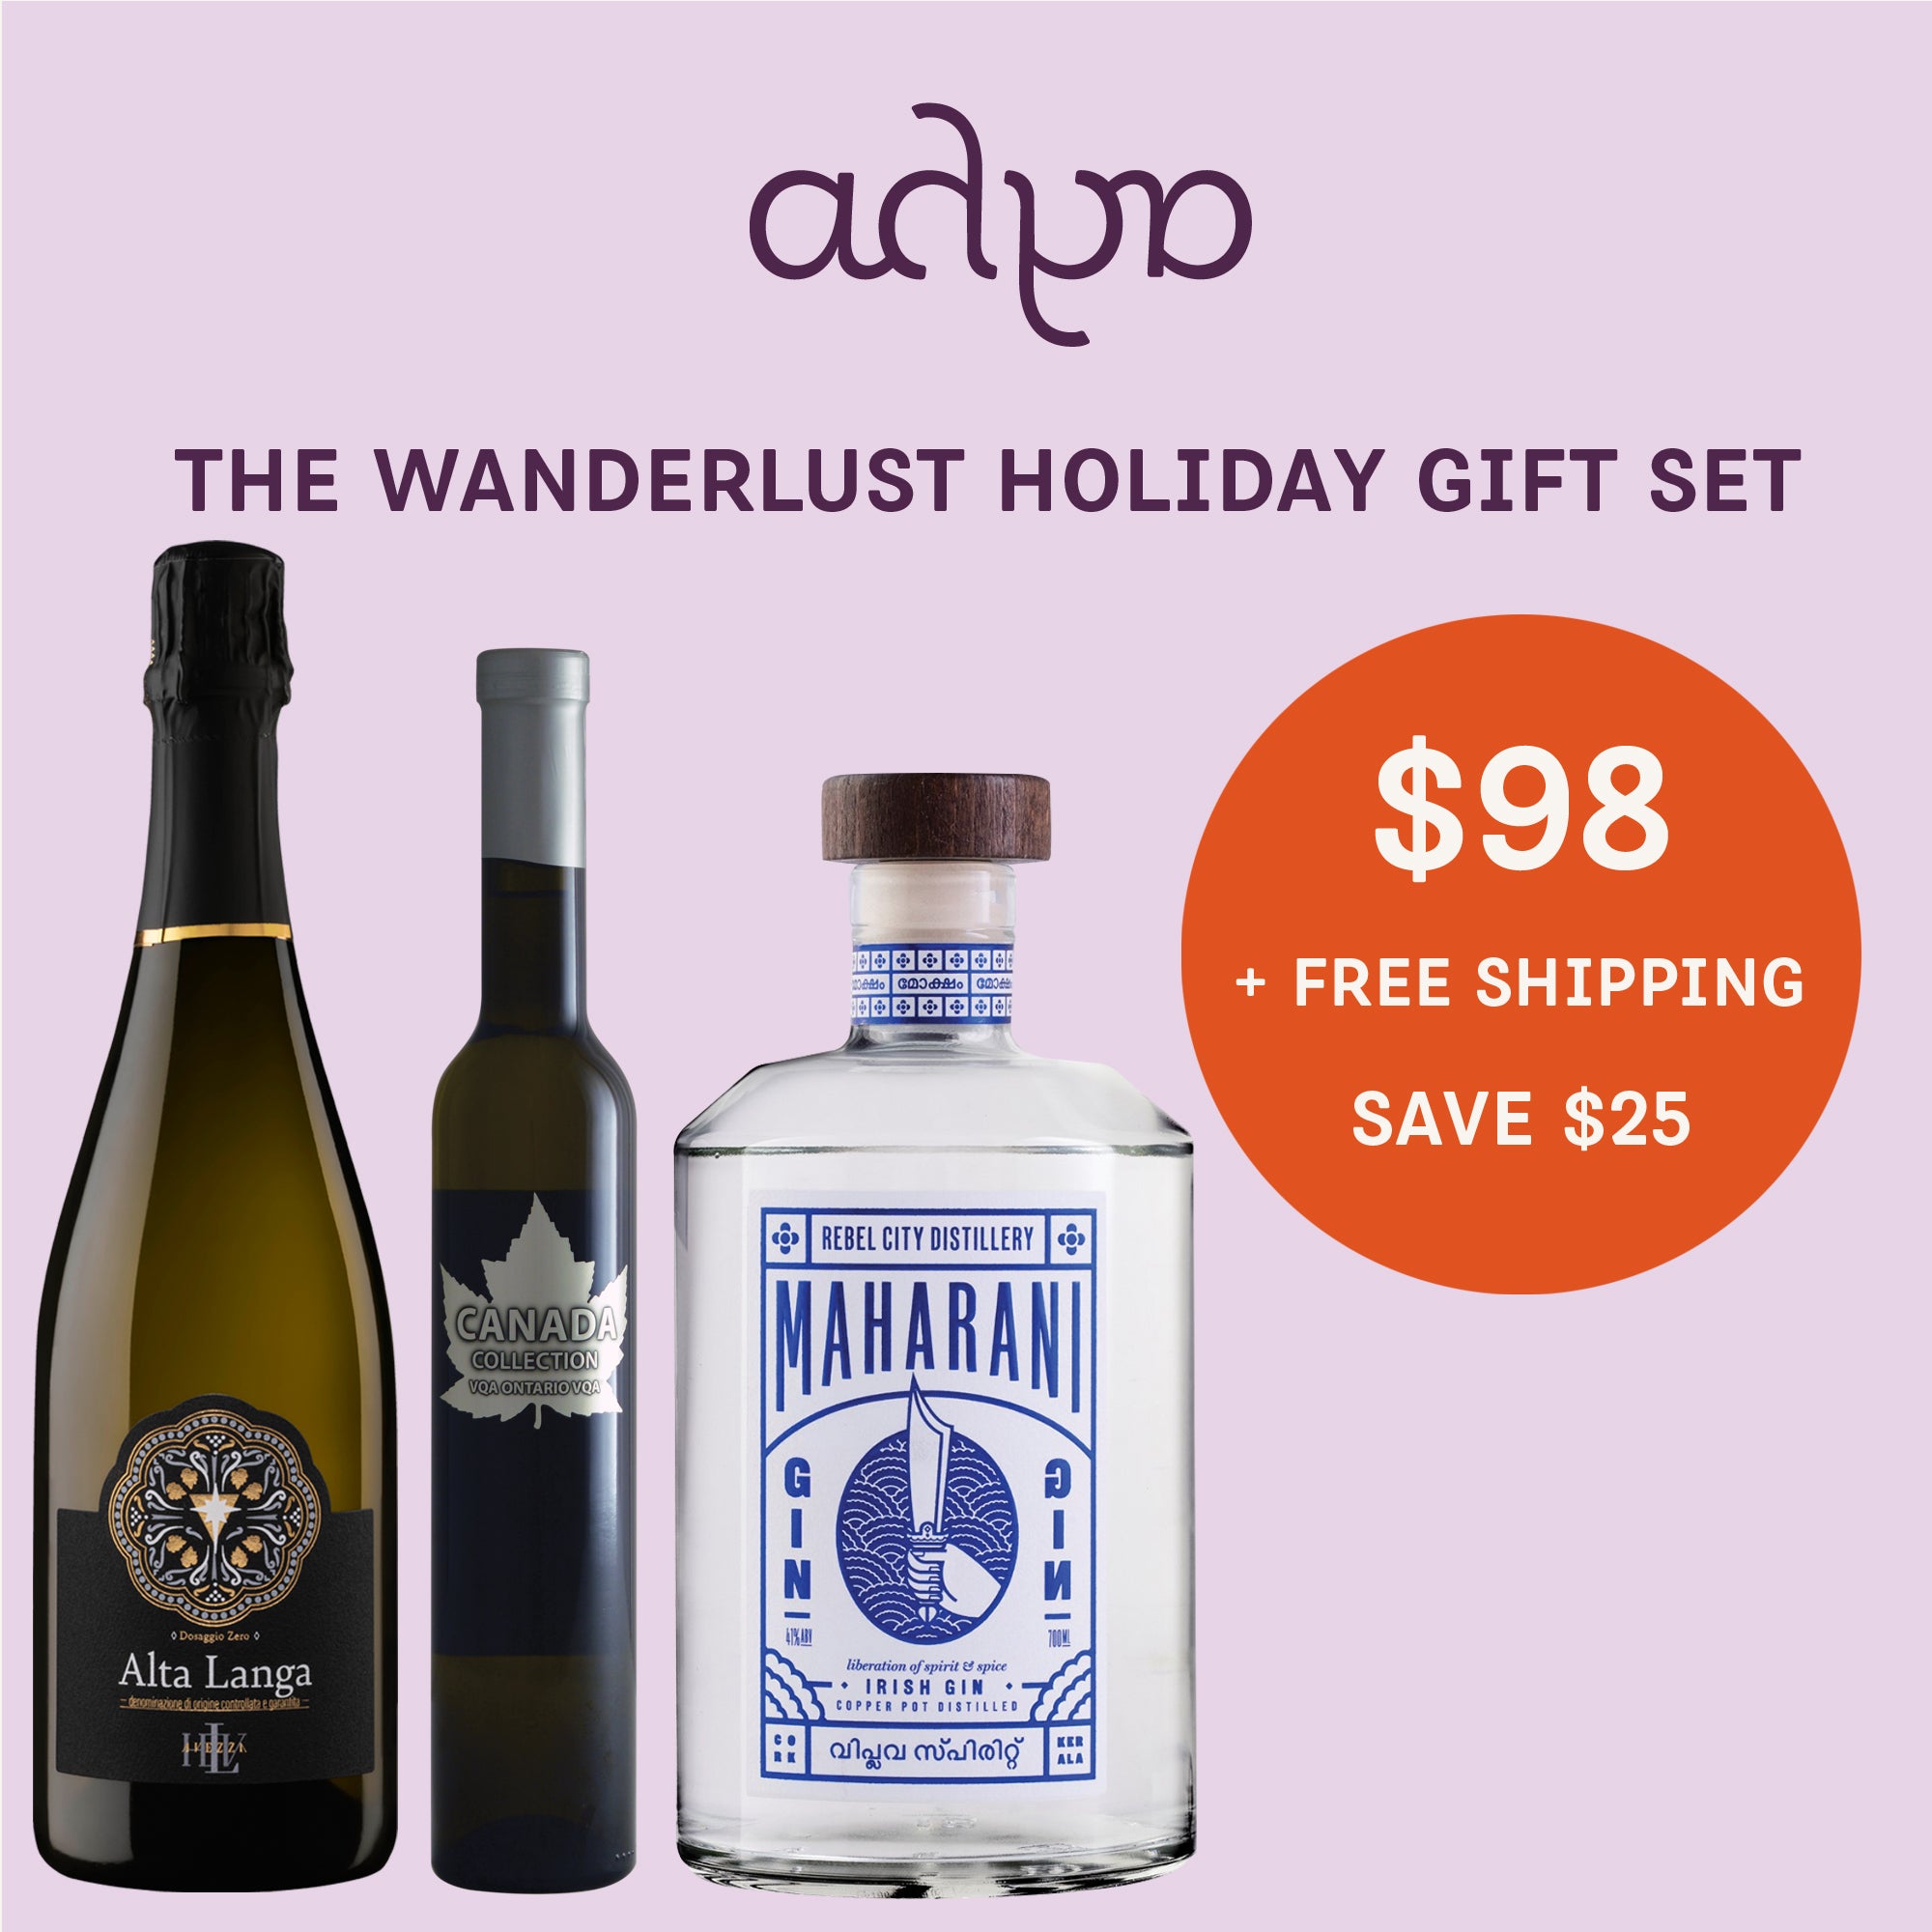 The Wanderlust Holiday Gift Set